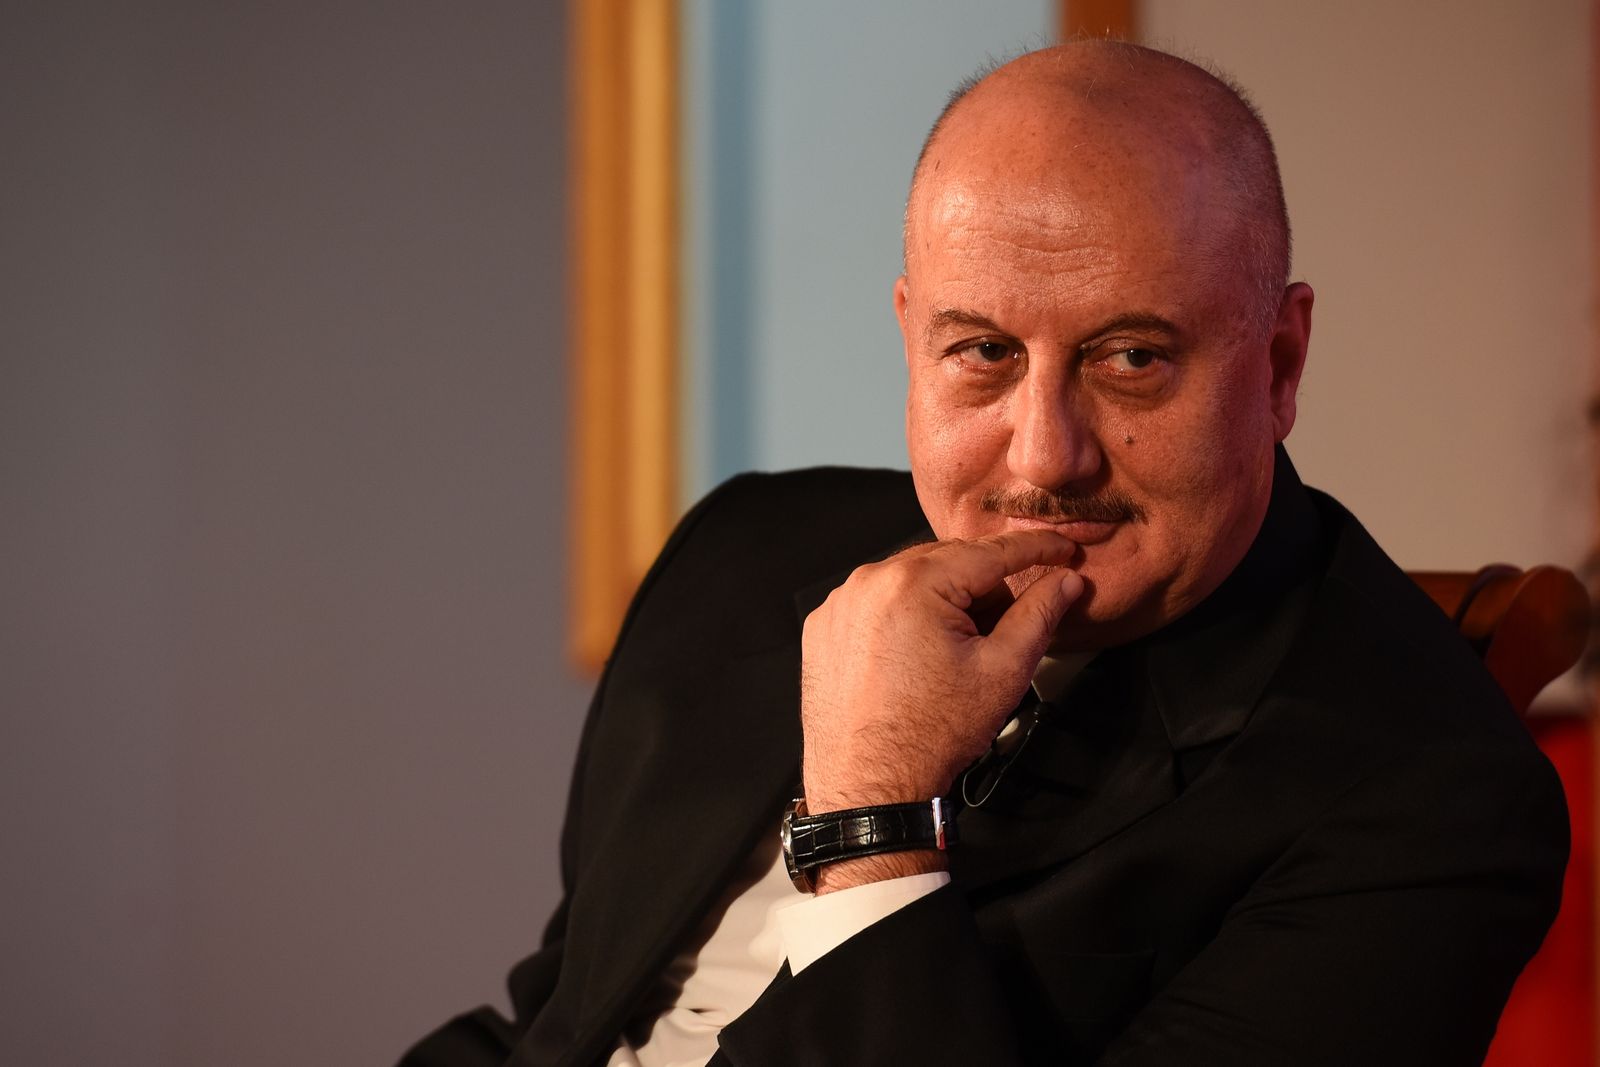 Anupam Kher To Make His Kannada Debut With Acharya Arrest?